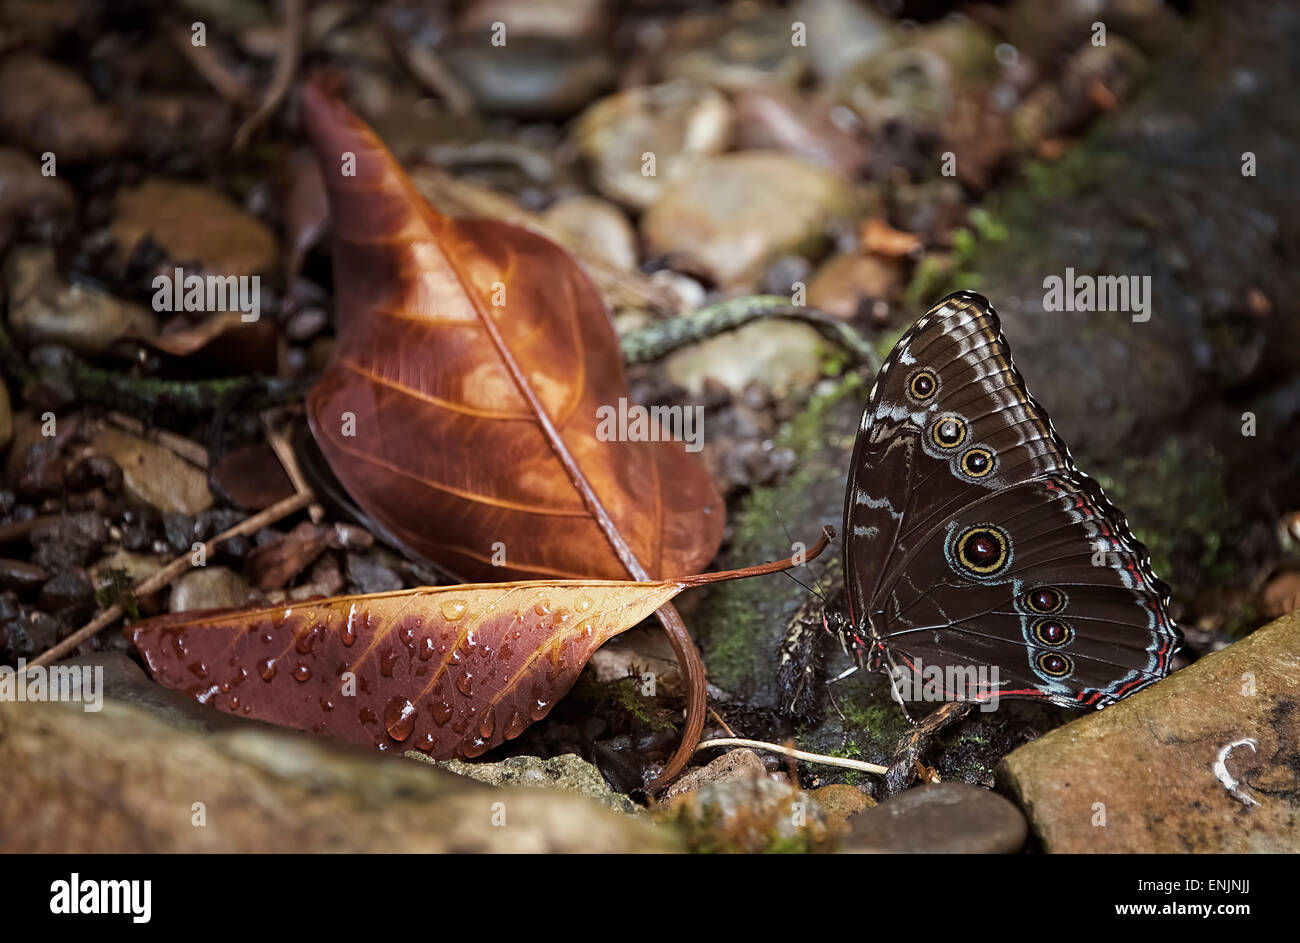 Common morpho butterfly camouflaged by dead leaf in garden. Stock Photo